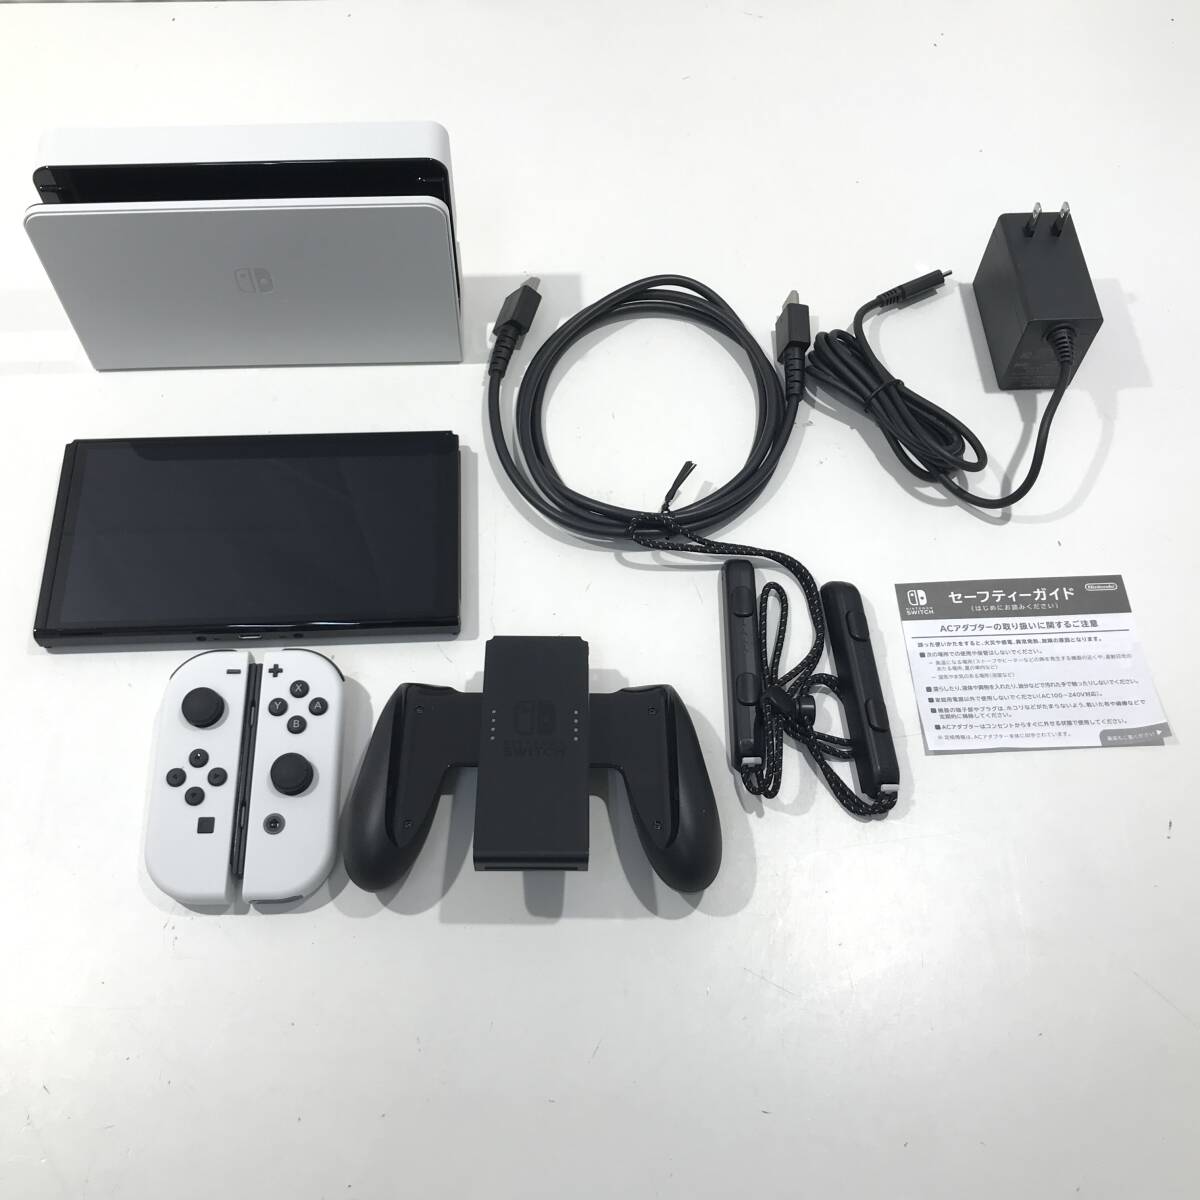 1 jpy start used store seal less Nintendo Switch have machine EL model white ⑤